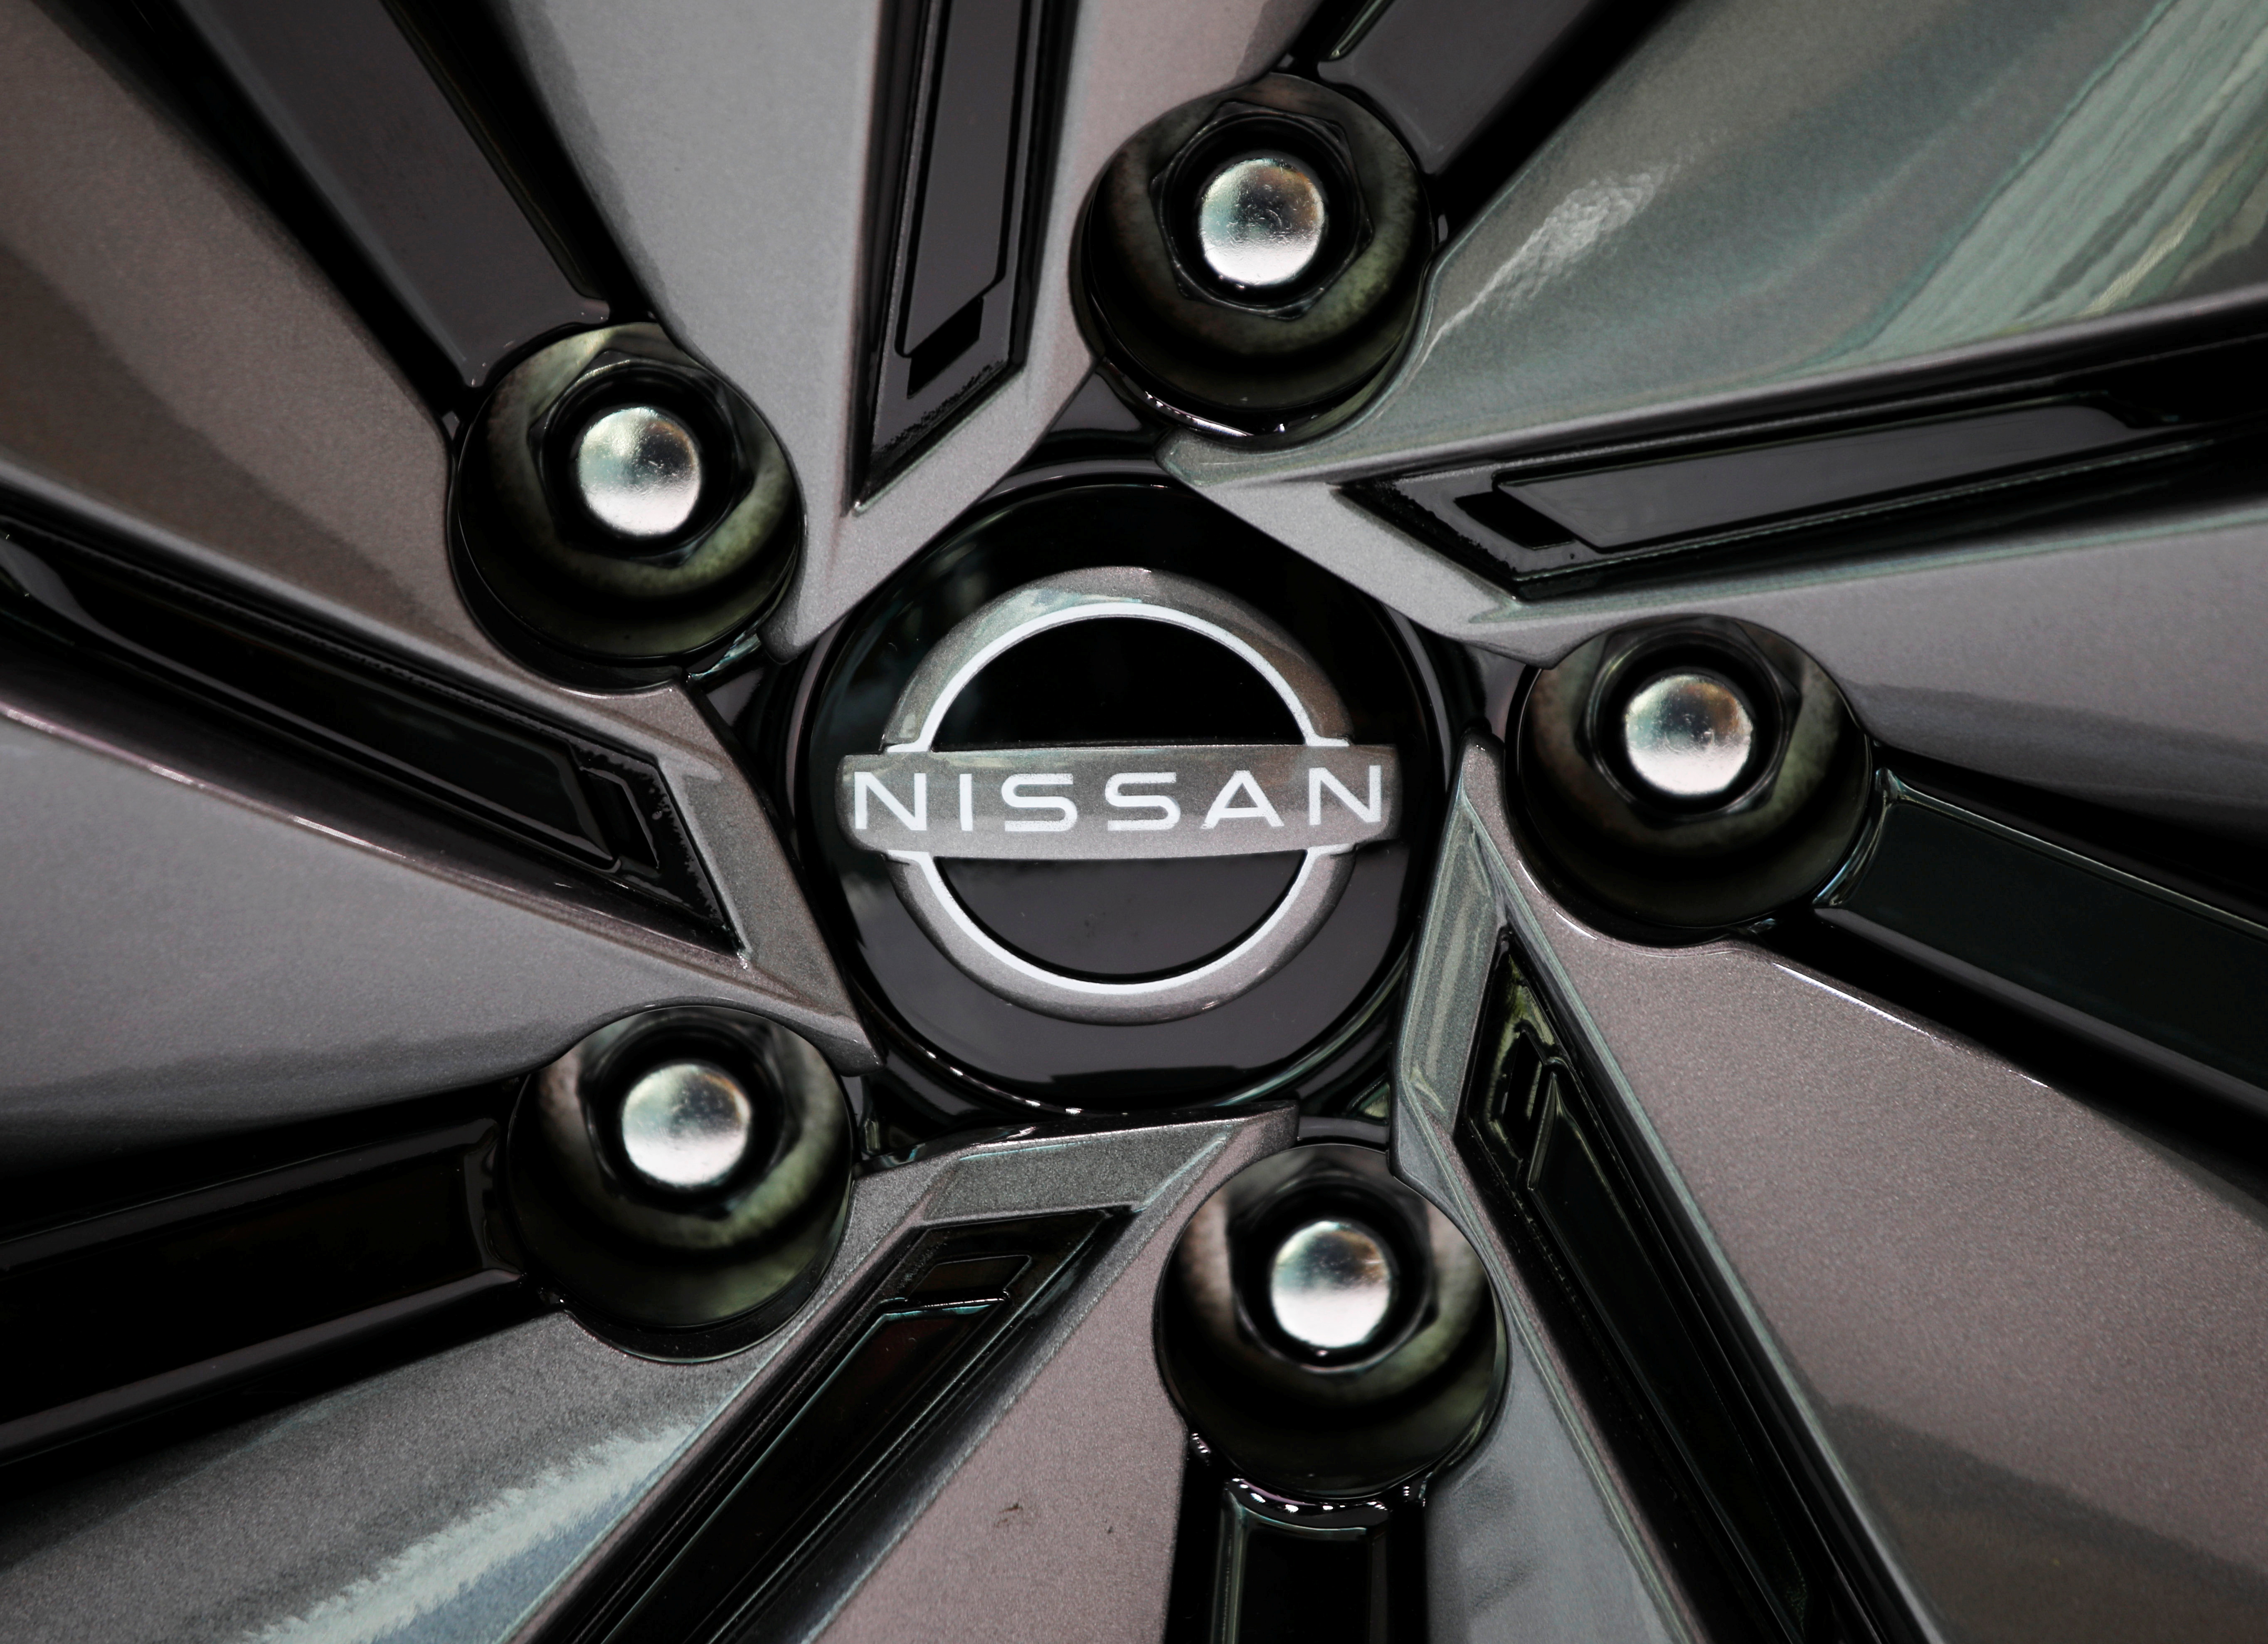 The brand logo of Nissan Motor Corp. is seen on a tyre wheel of the company's car at their showroom in Tokyo, Japan November 11, 2020.  REUTERS/Issei Kato